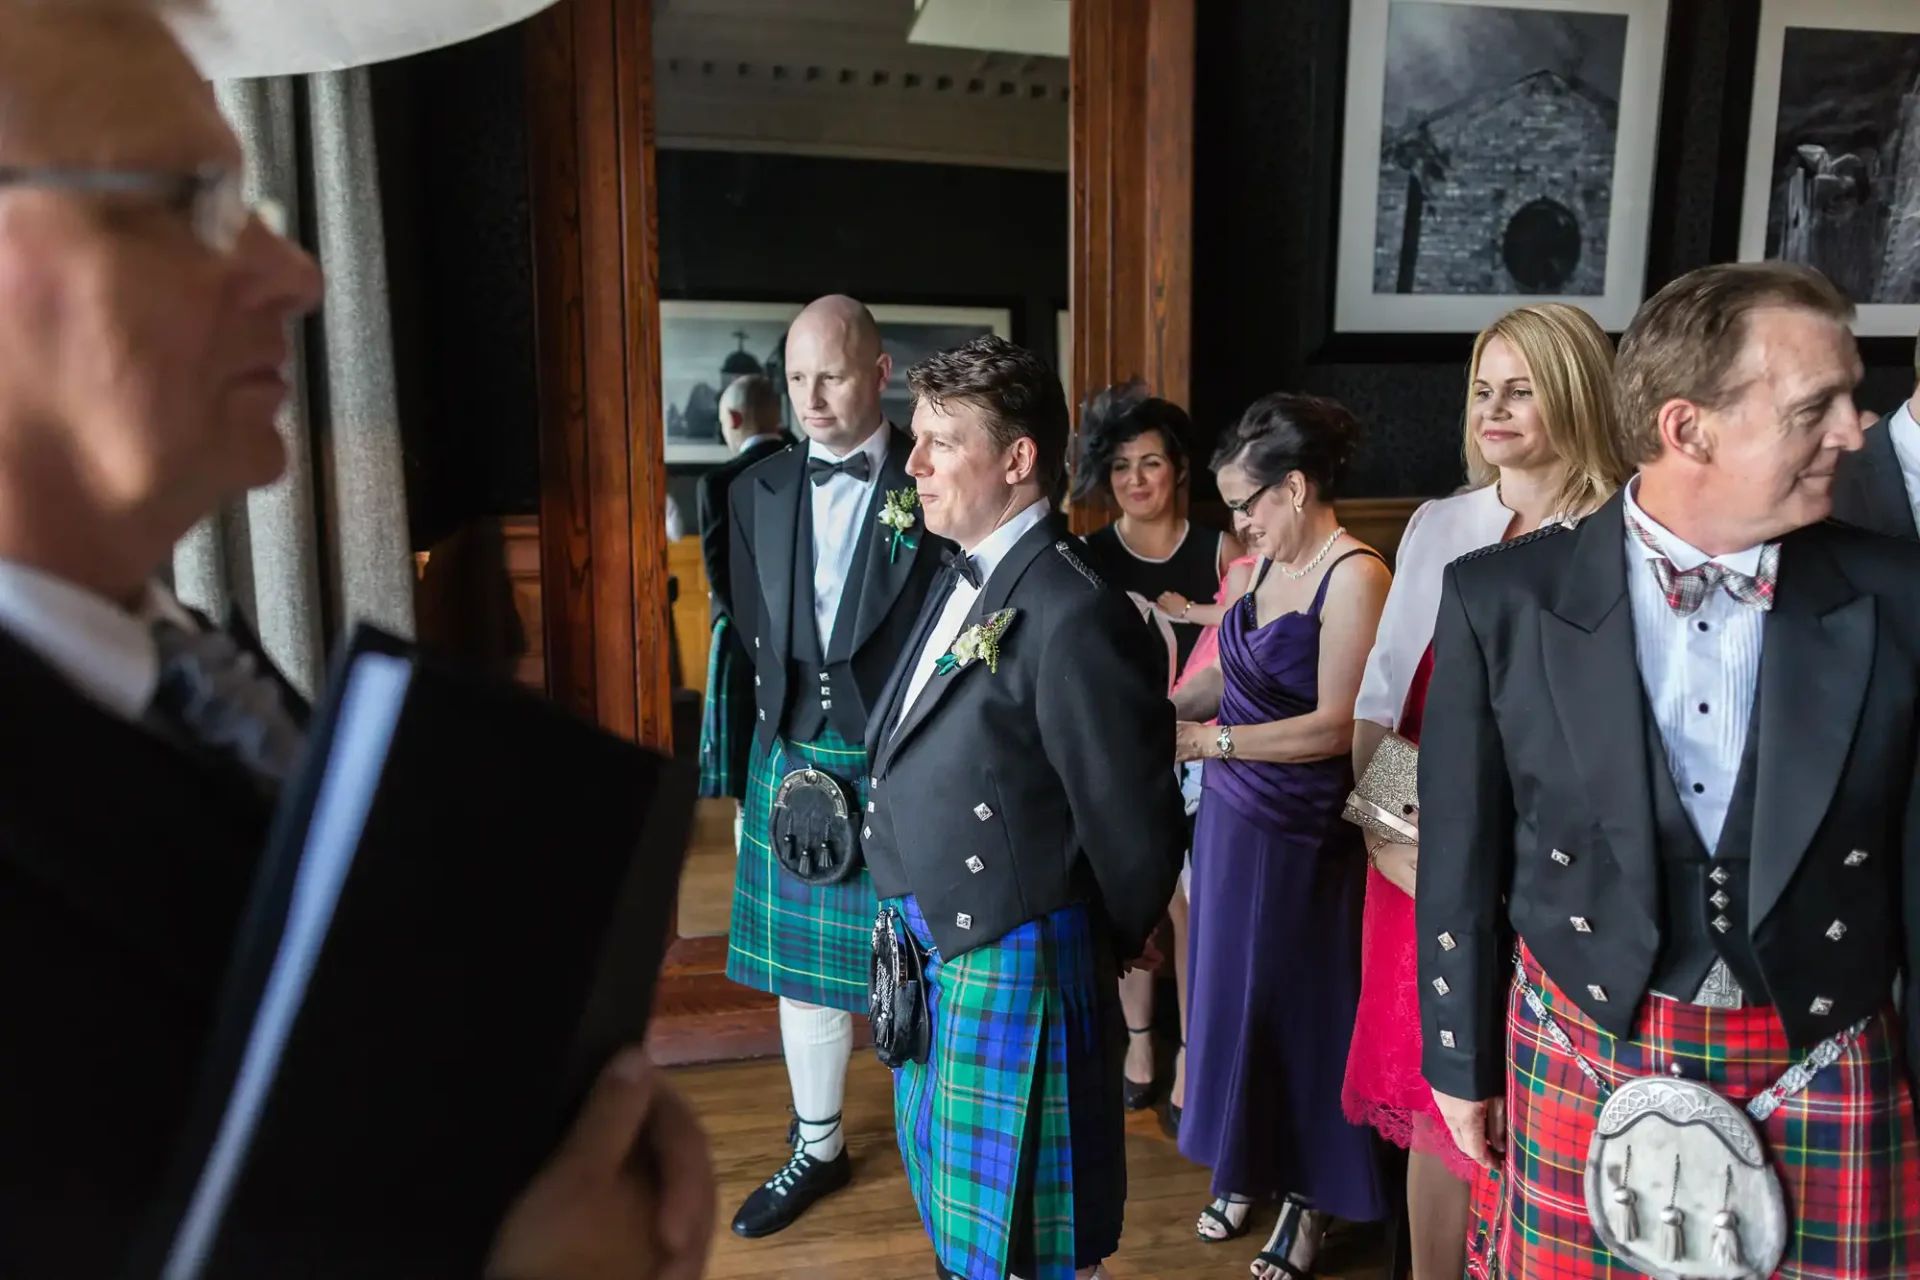 A group of people in formal attire, including kilts, attentively listening to a speaker in a room with traditional decor.